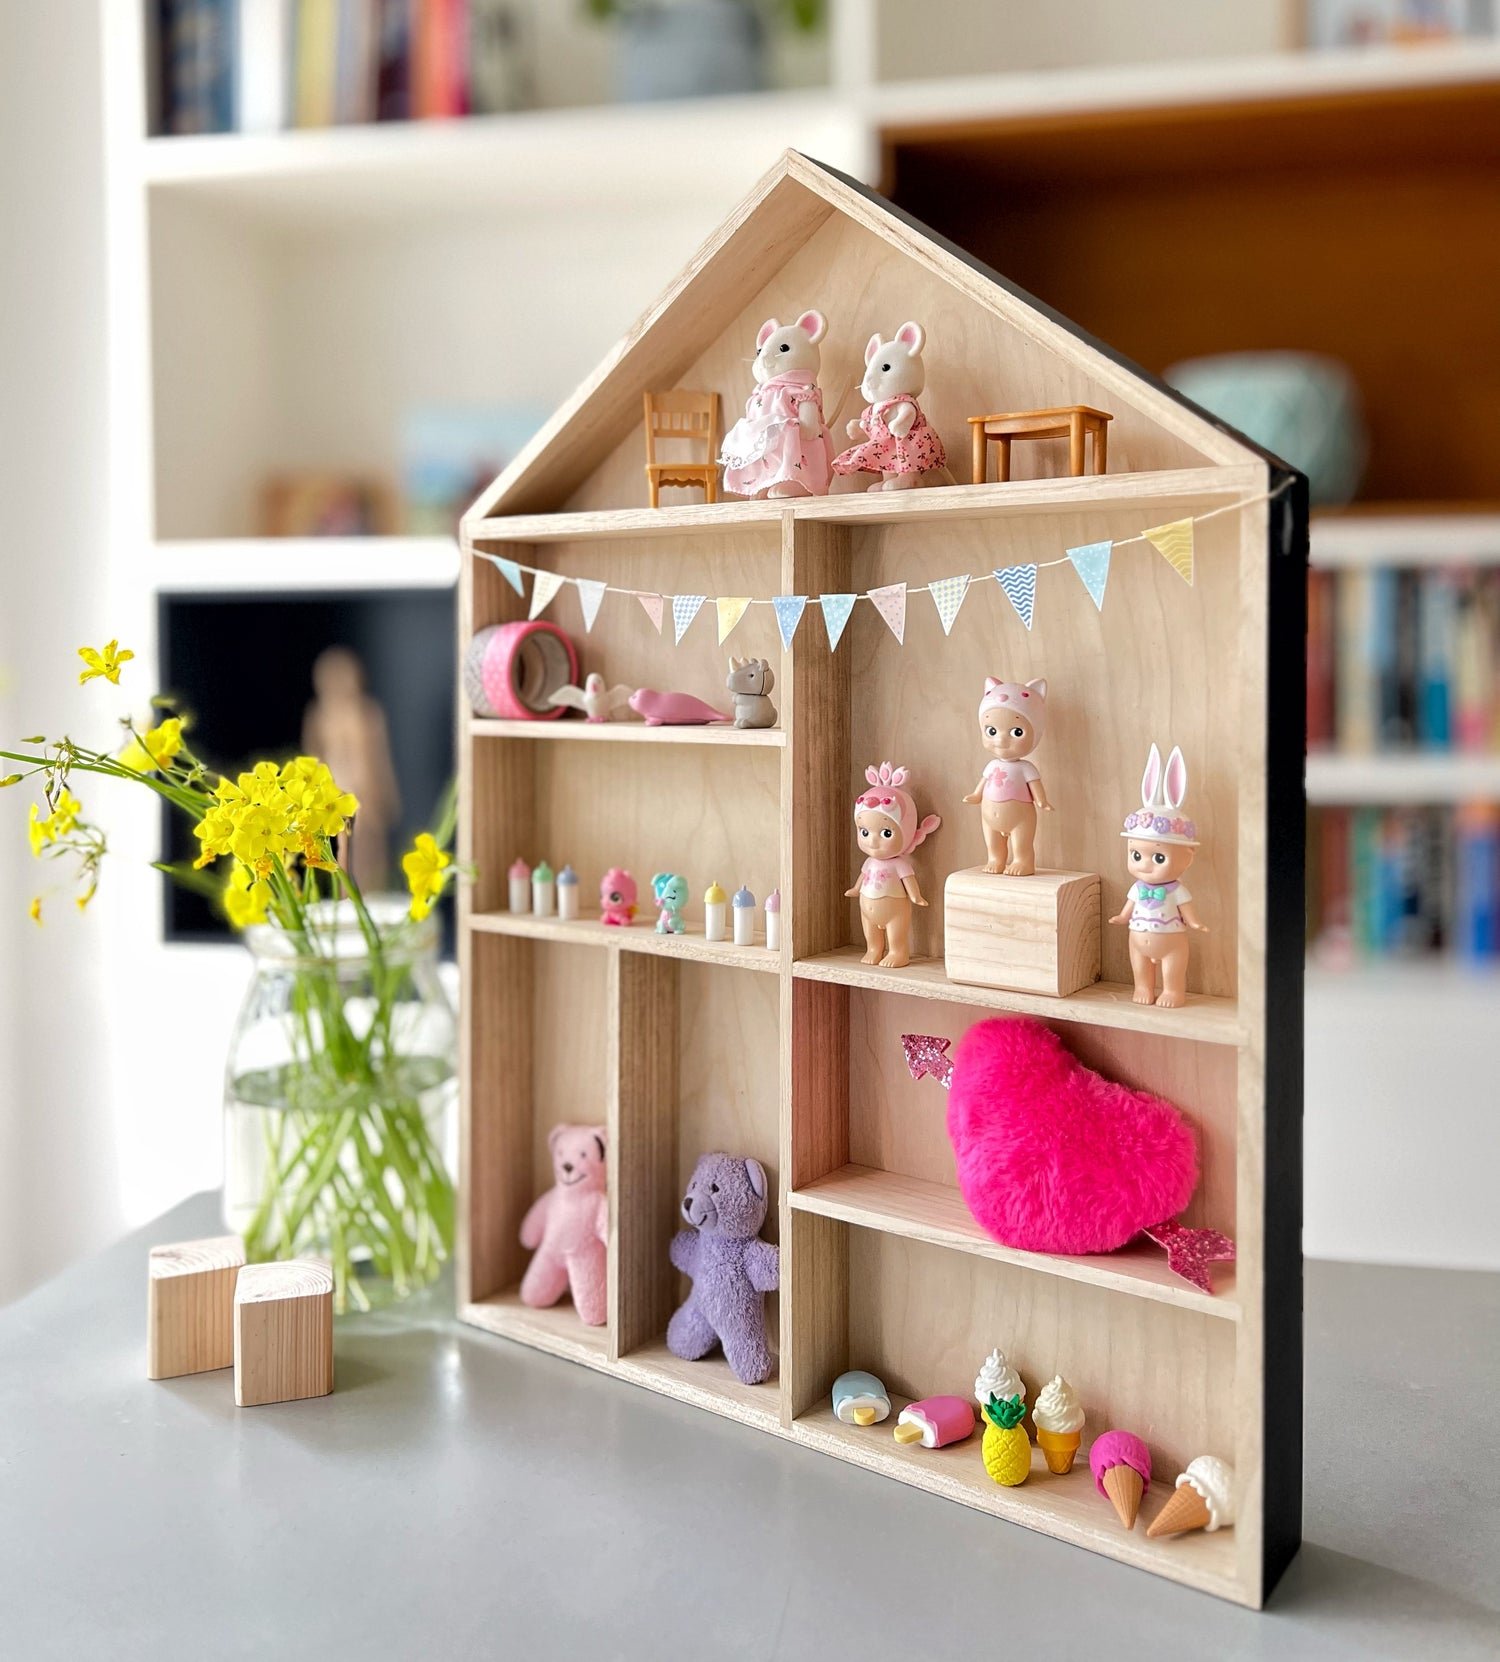 A wooden display shelf displaying cute items, with a paper bunting in pastel colors decorating it